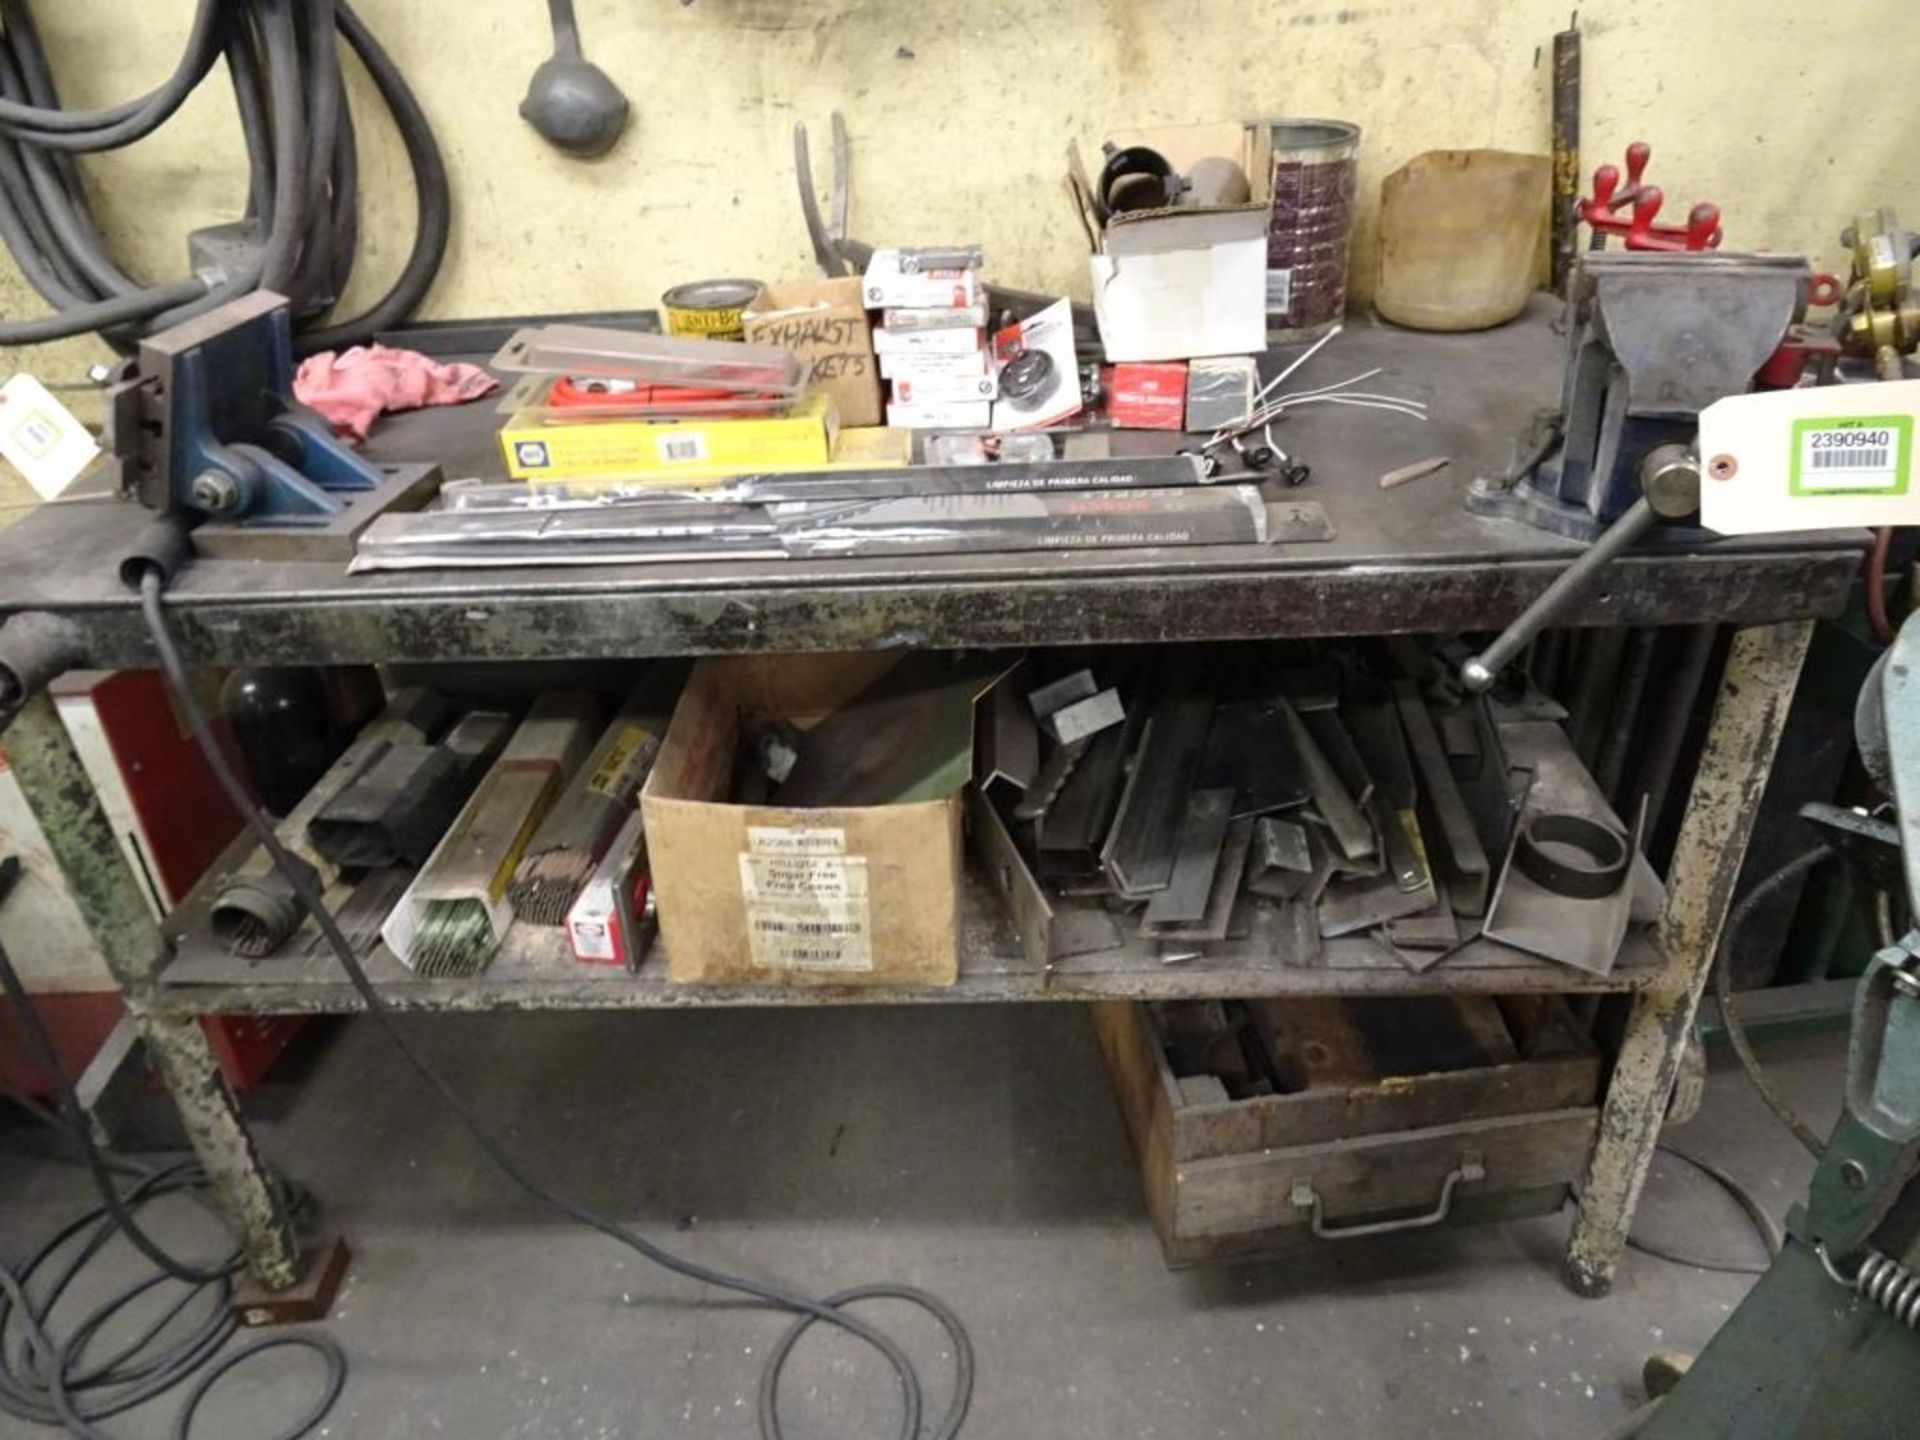 Work Bench & Contents